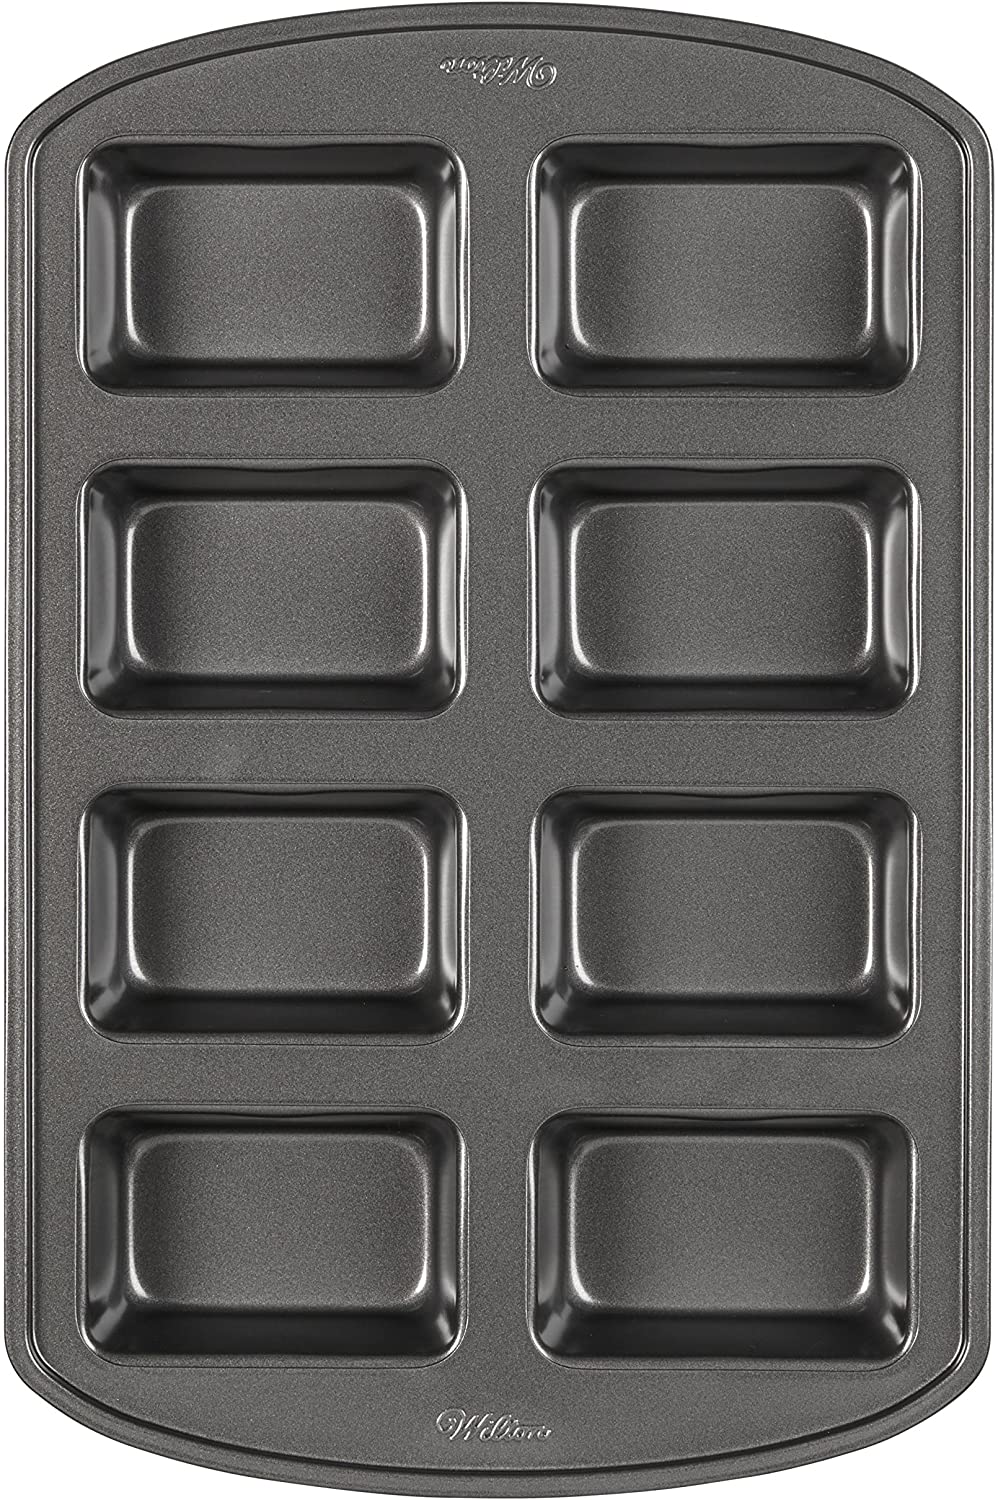 https://www.wideopencountry.com/wp-content/uploads/sites/4/eats/2020/10/Wilton-Perfect-Results-Non-Stick-Mini-Loaf-Pan-8-Cavity-.jpg?resize=998%2C1500